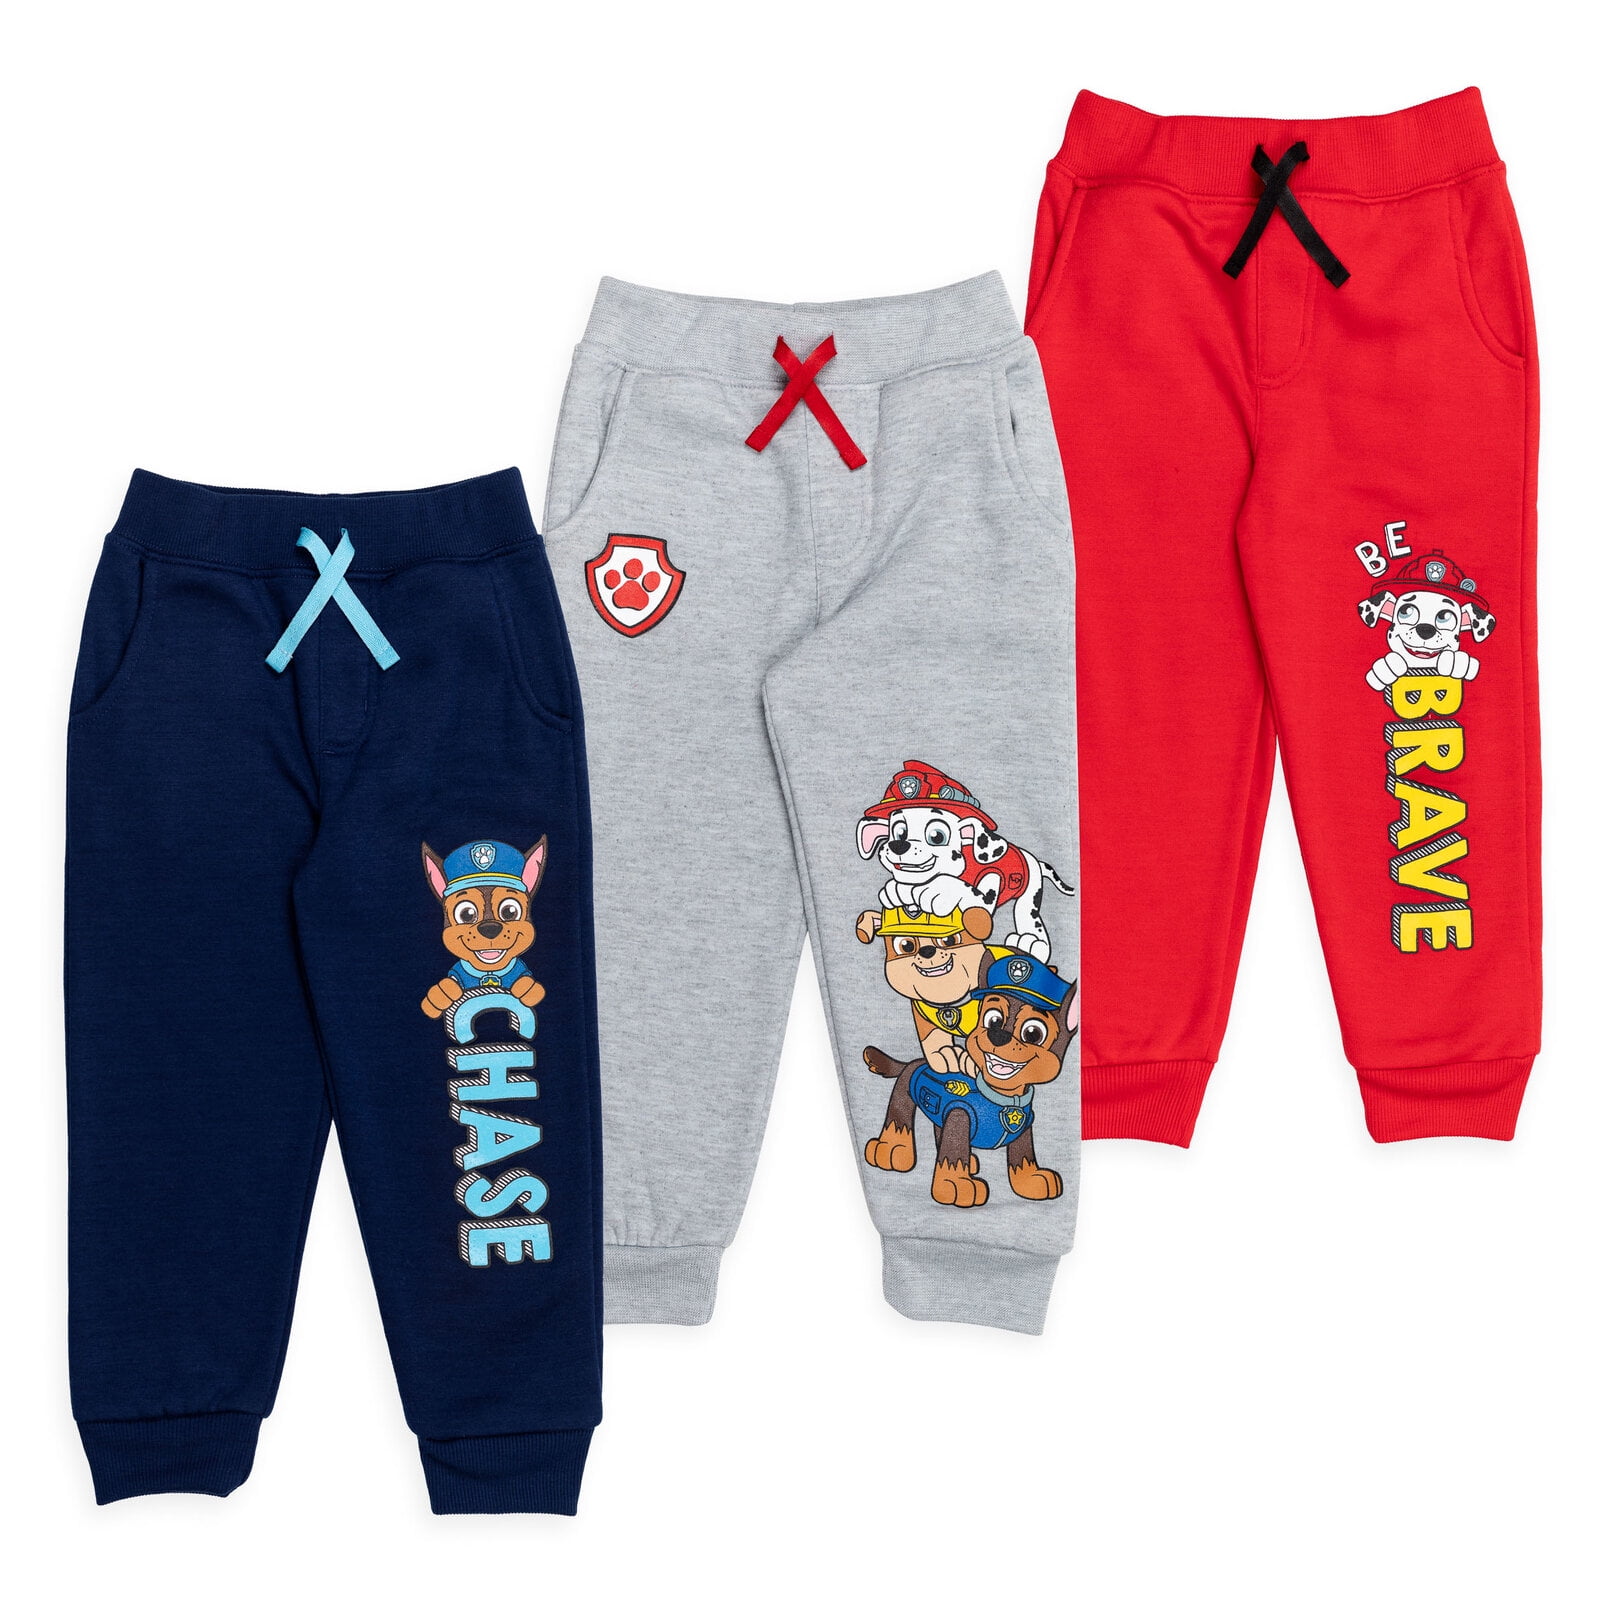 Boys Licensed Character Long Sleeve Top and Pants, 2-Piece Sleet